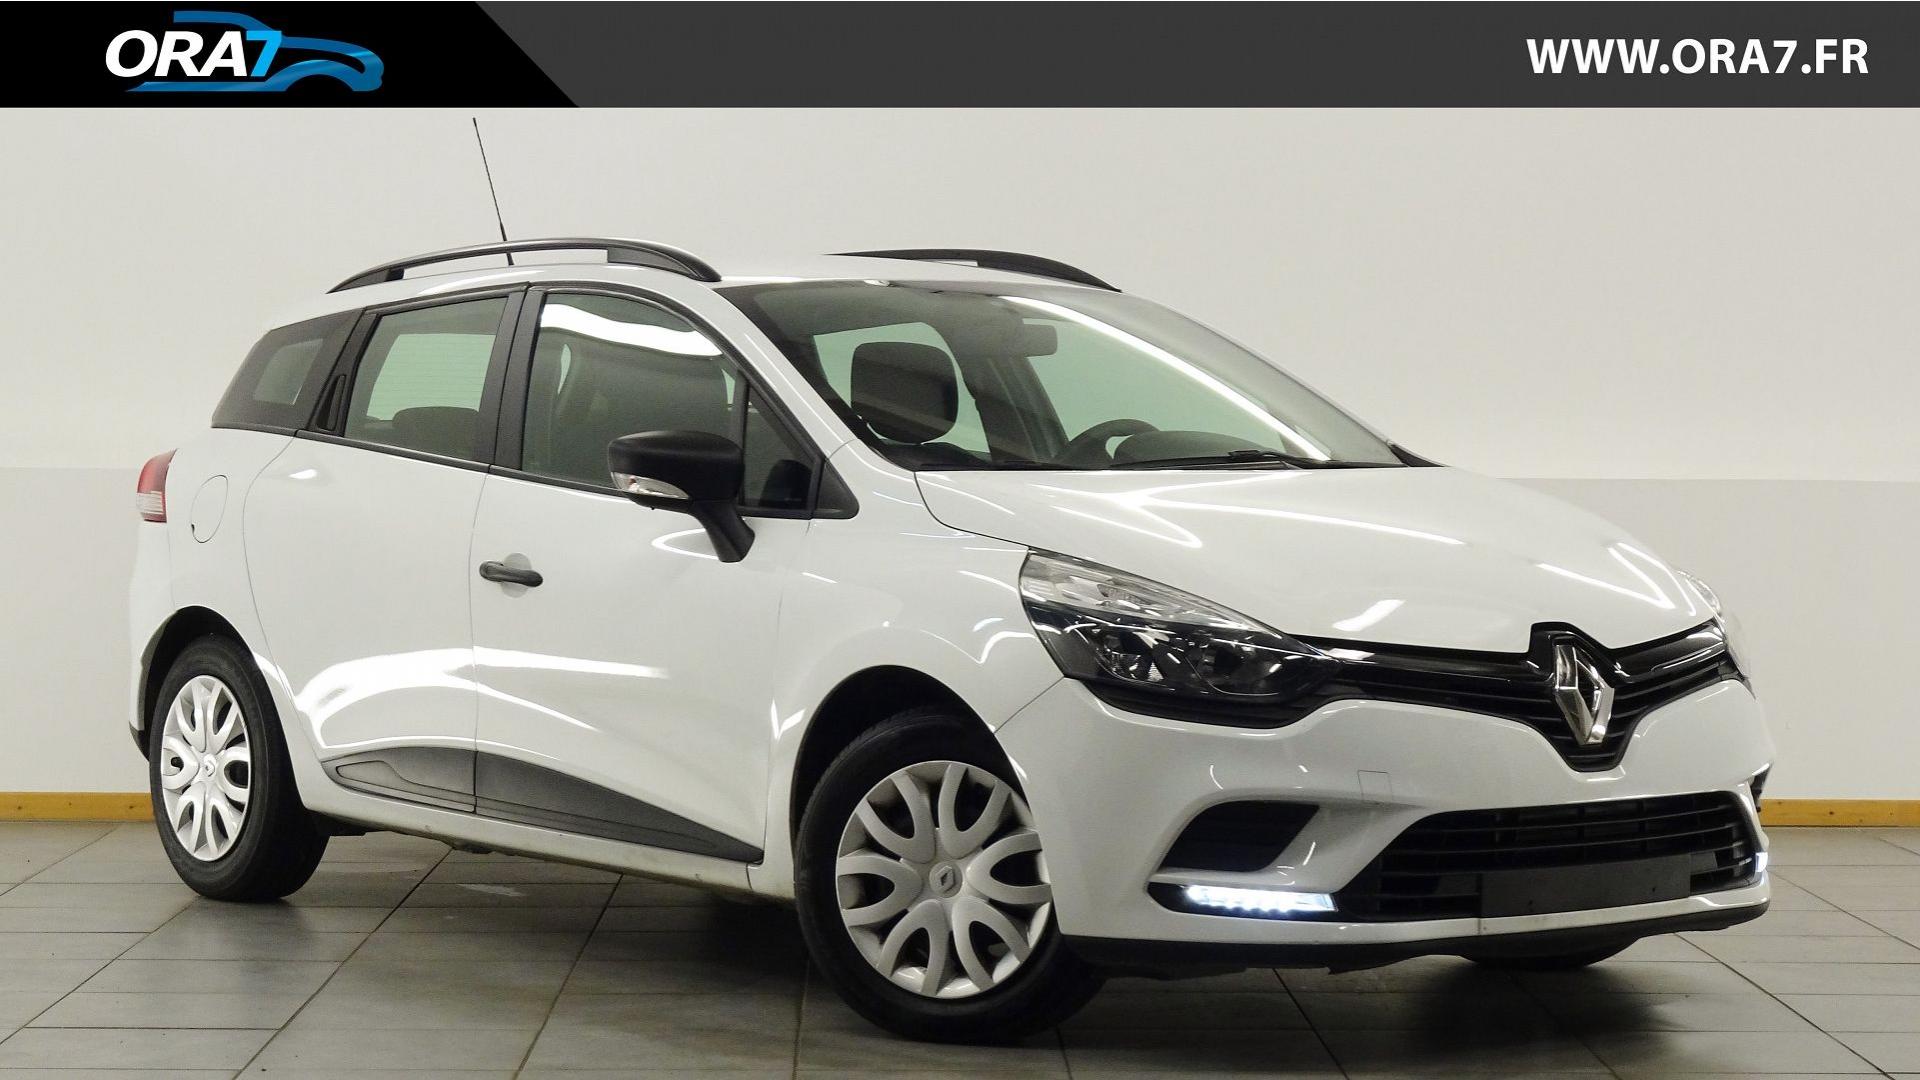 RENAULT CLIO IV ESTATE 0.9 TCE 75CH ENERGY LIMITED EURO6C